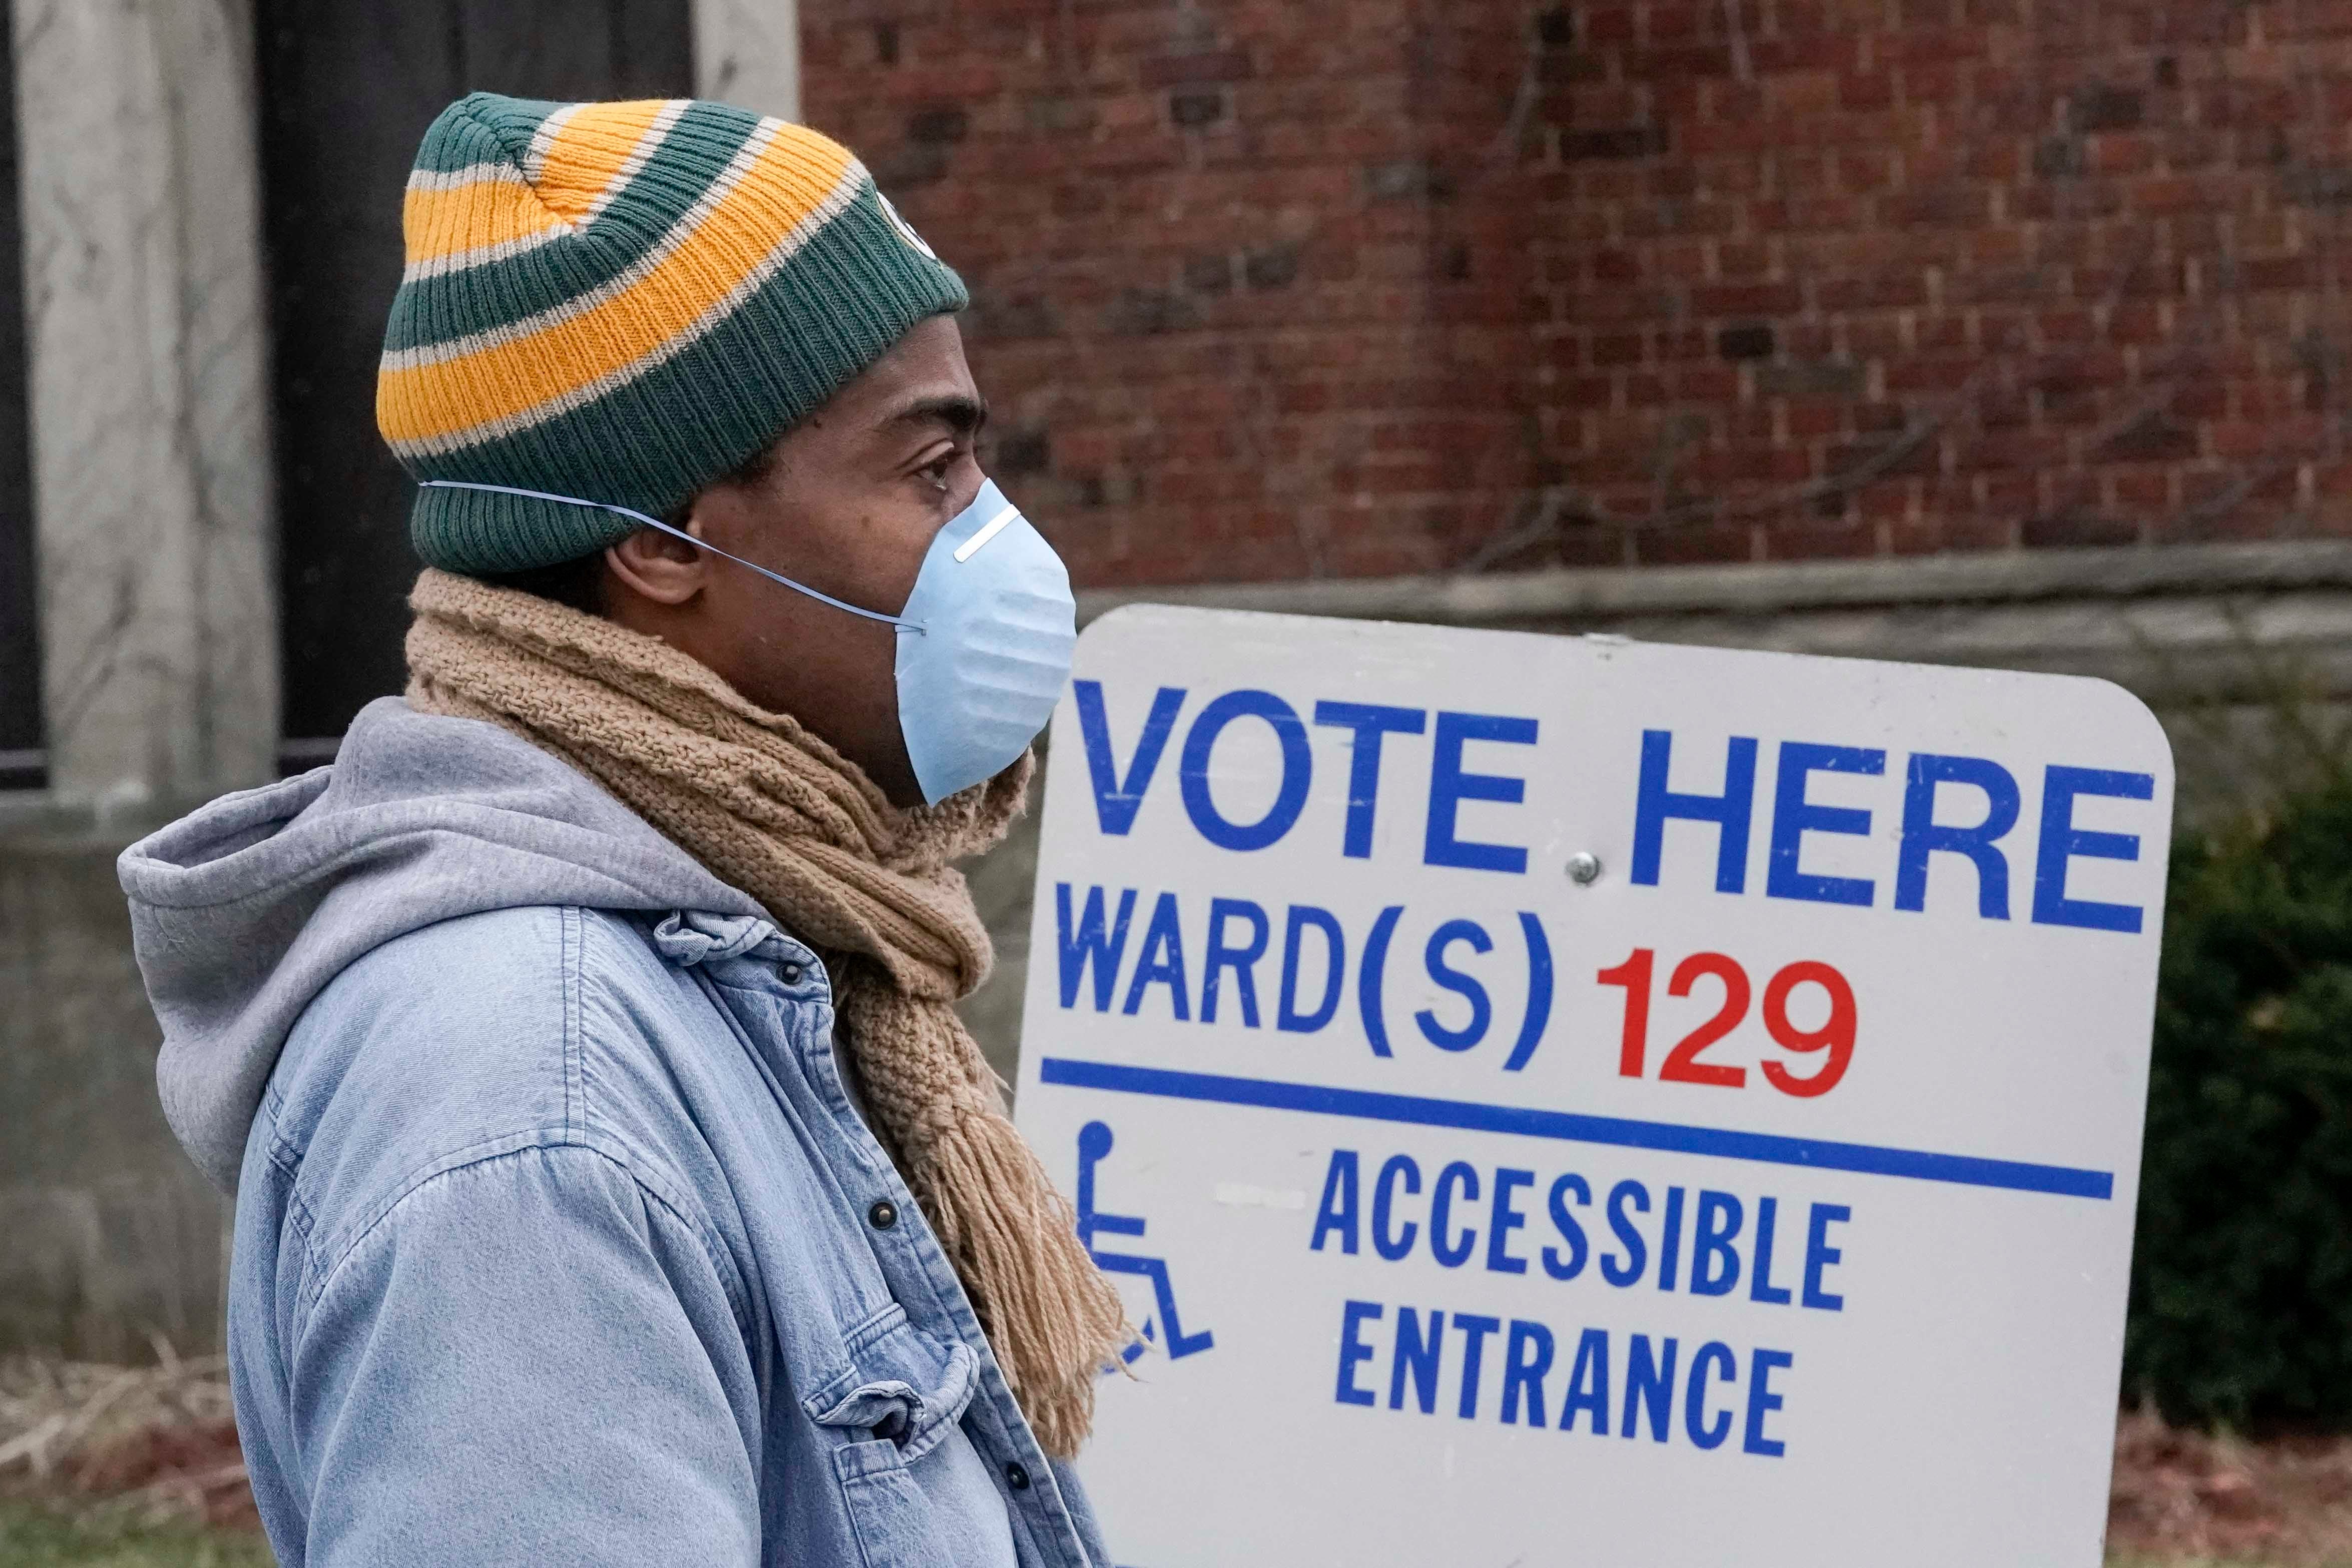 A voter wears a mask while waiting to cast ballot.